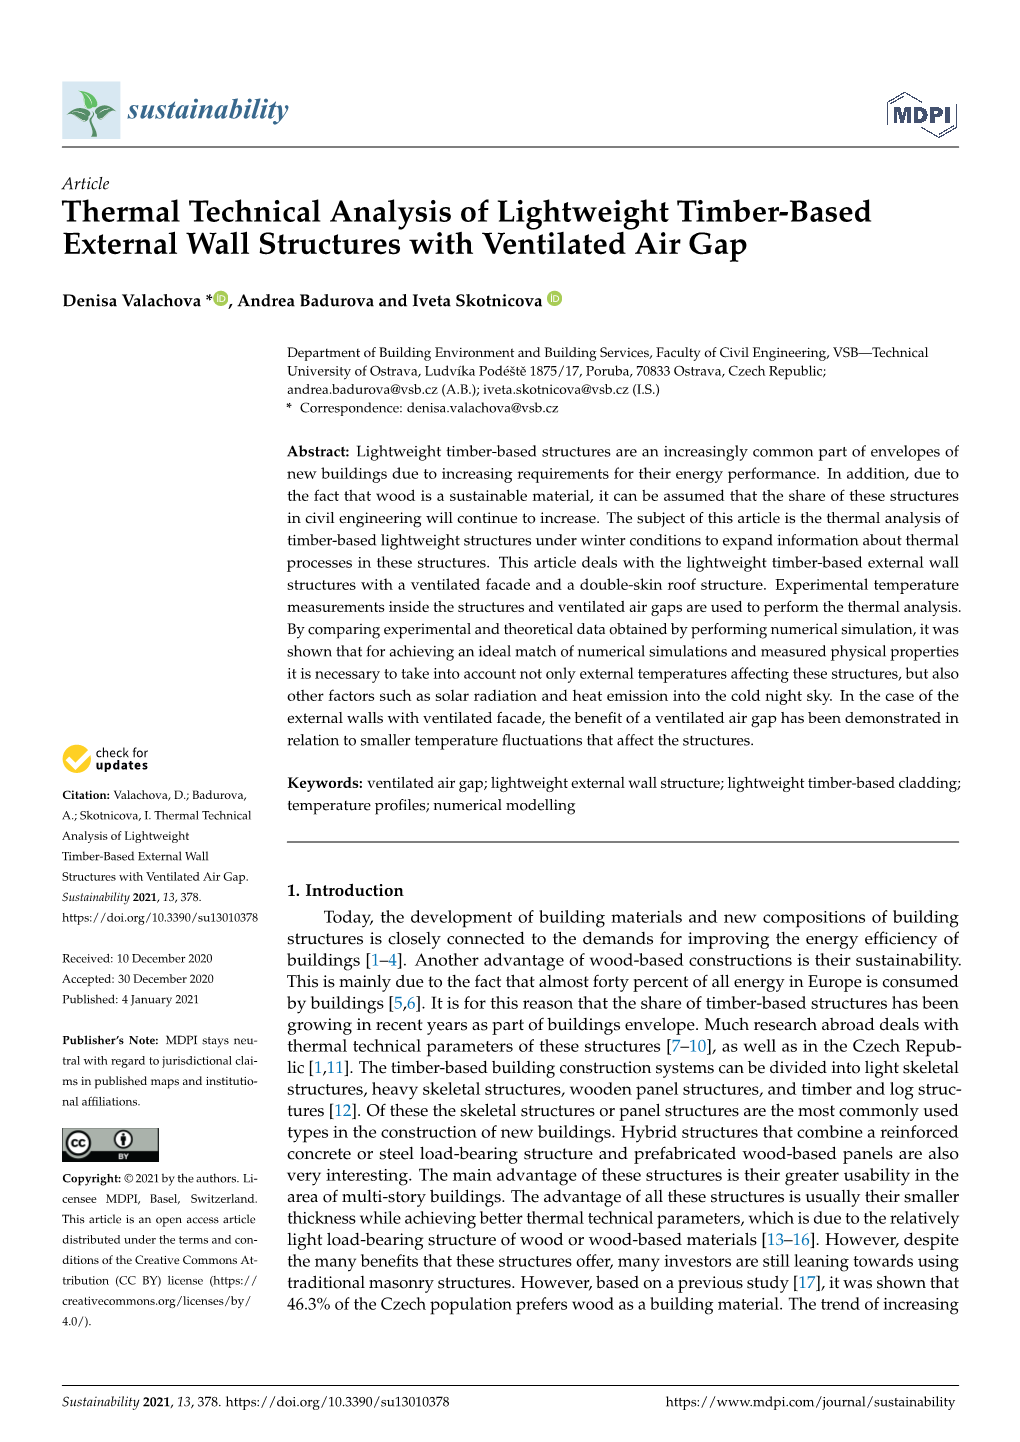 Thermal Technical Analysis of Lightweight Timber-Based External Wall Structures with Ventilated Air Gap